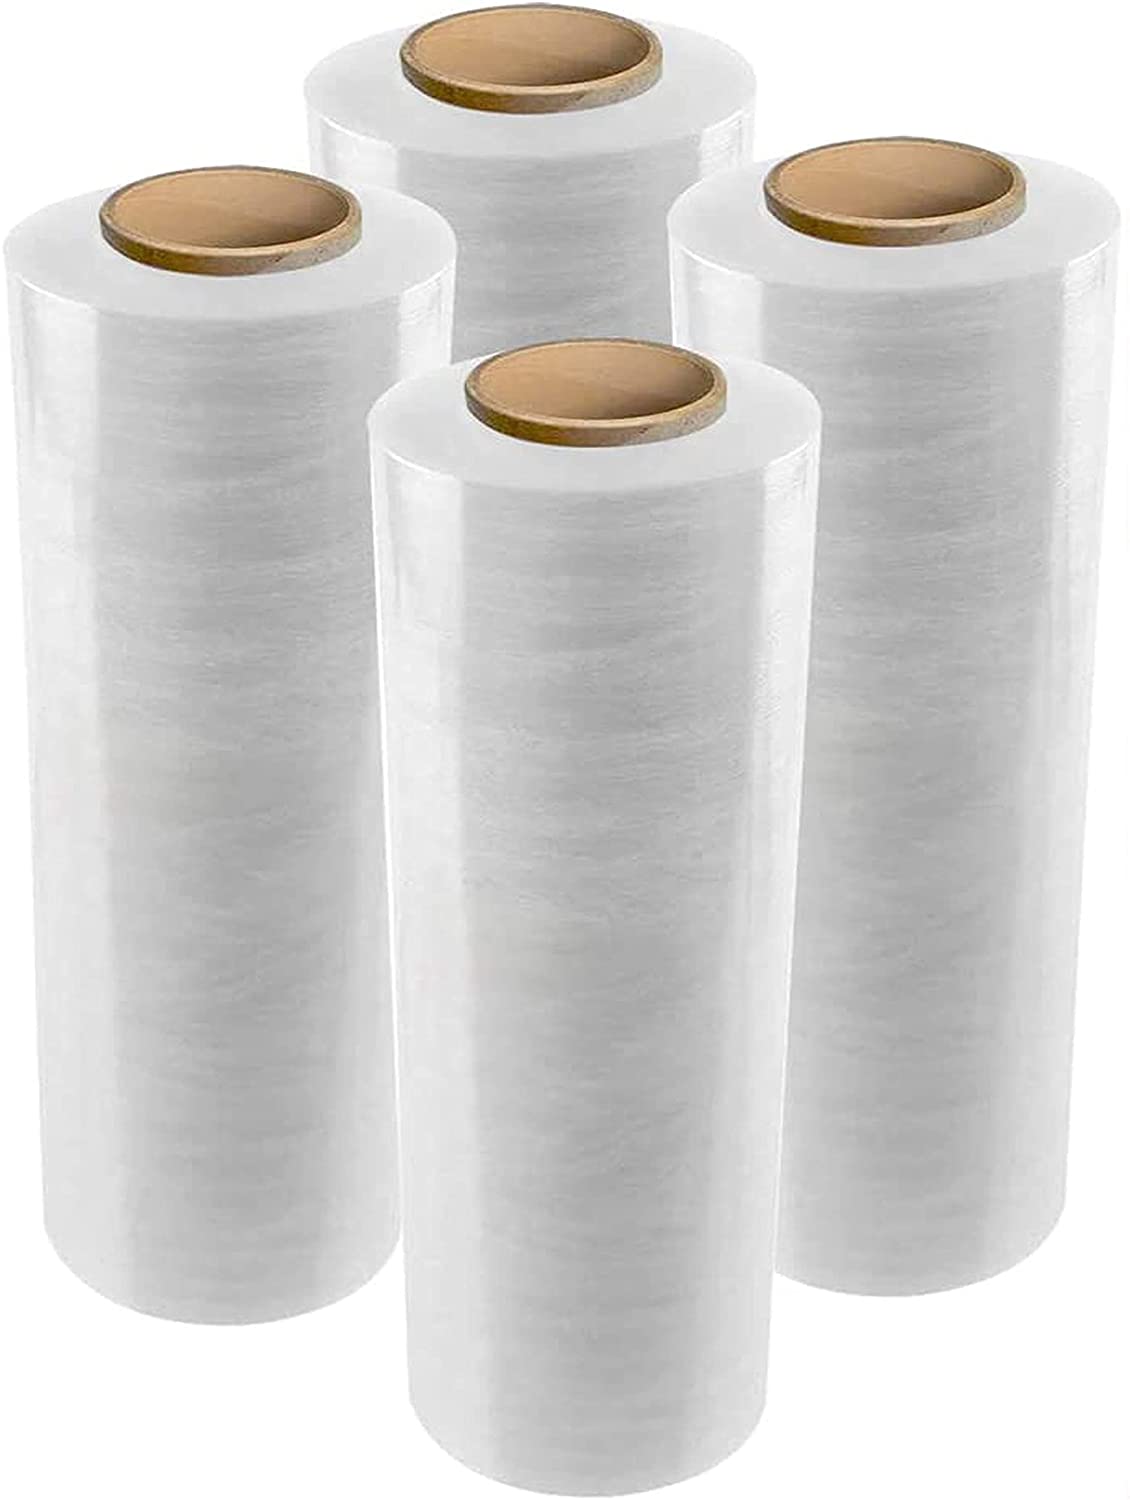 UNICOO – 19.75" 4 Rolls Pallet Wrap Stretch Film, Stretch Film/Wrap 1500 feet 80 Gauge Industrial Strength 20 Microns Clear Cling Durable Adhering Packing Moving Packaging Heavy Duty Shrink Film